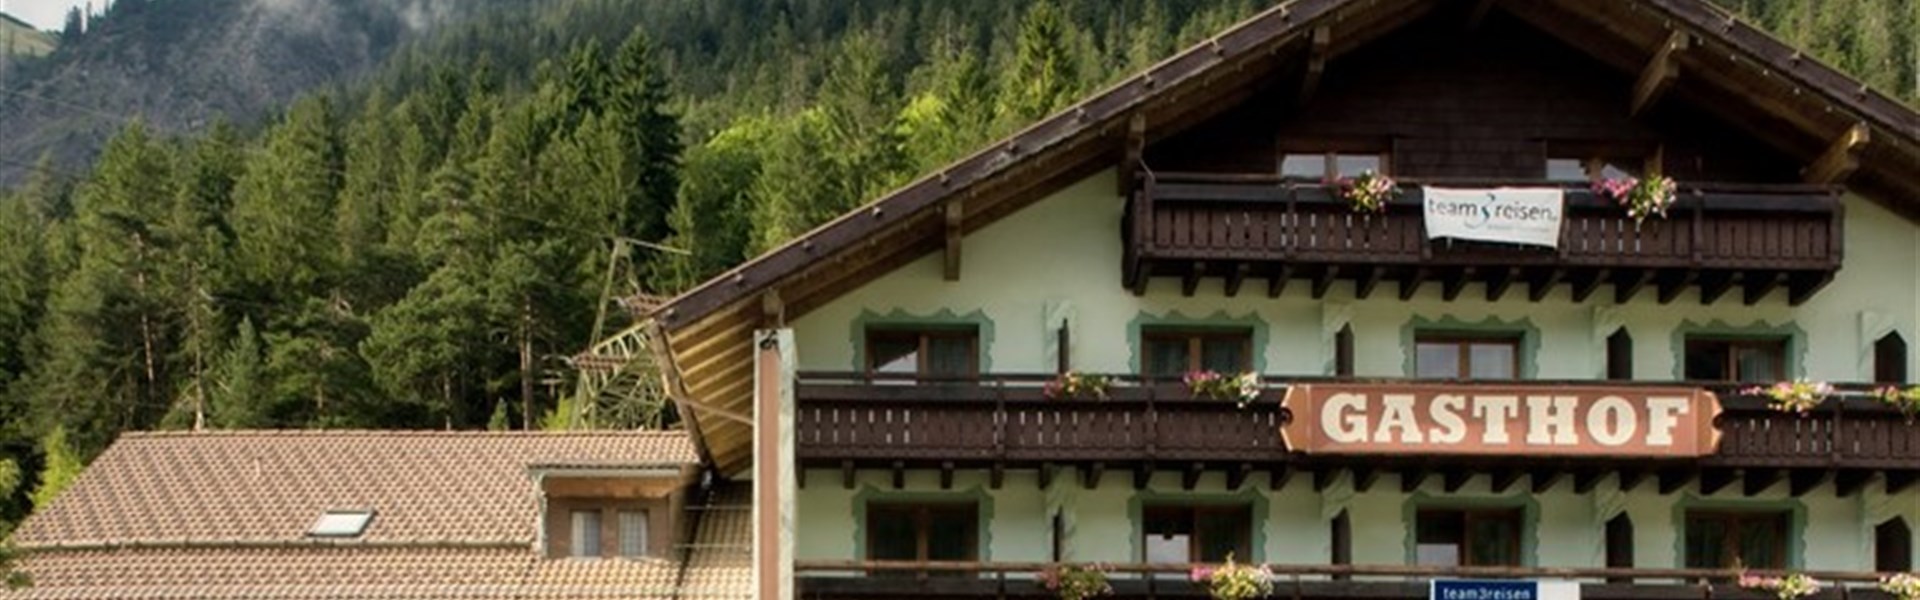 Marco Polo - Gasthof Spullersee - 